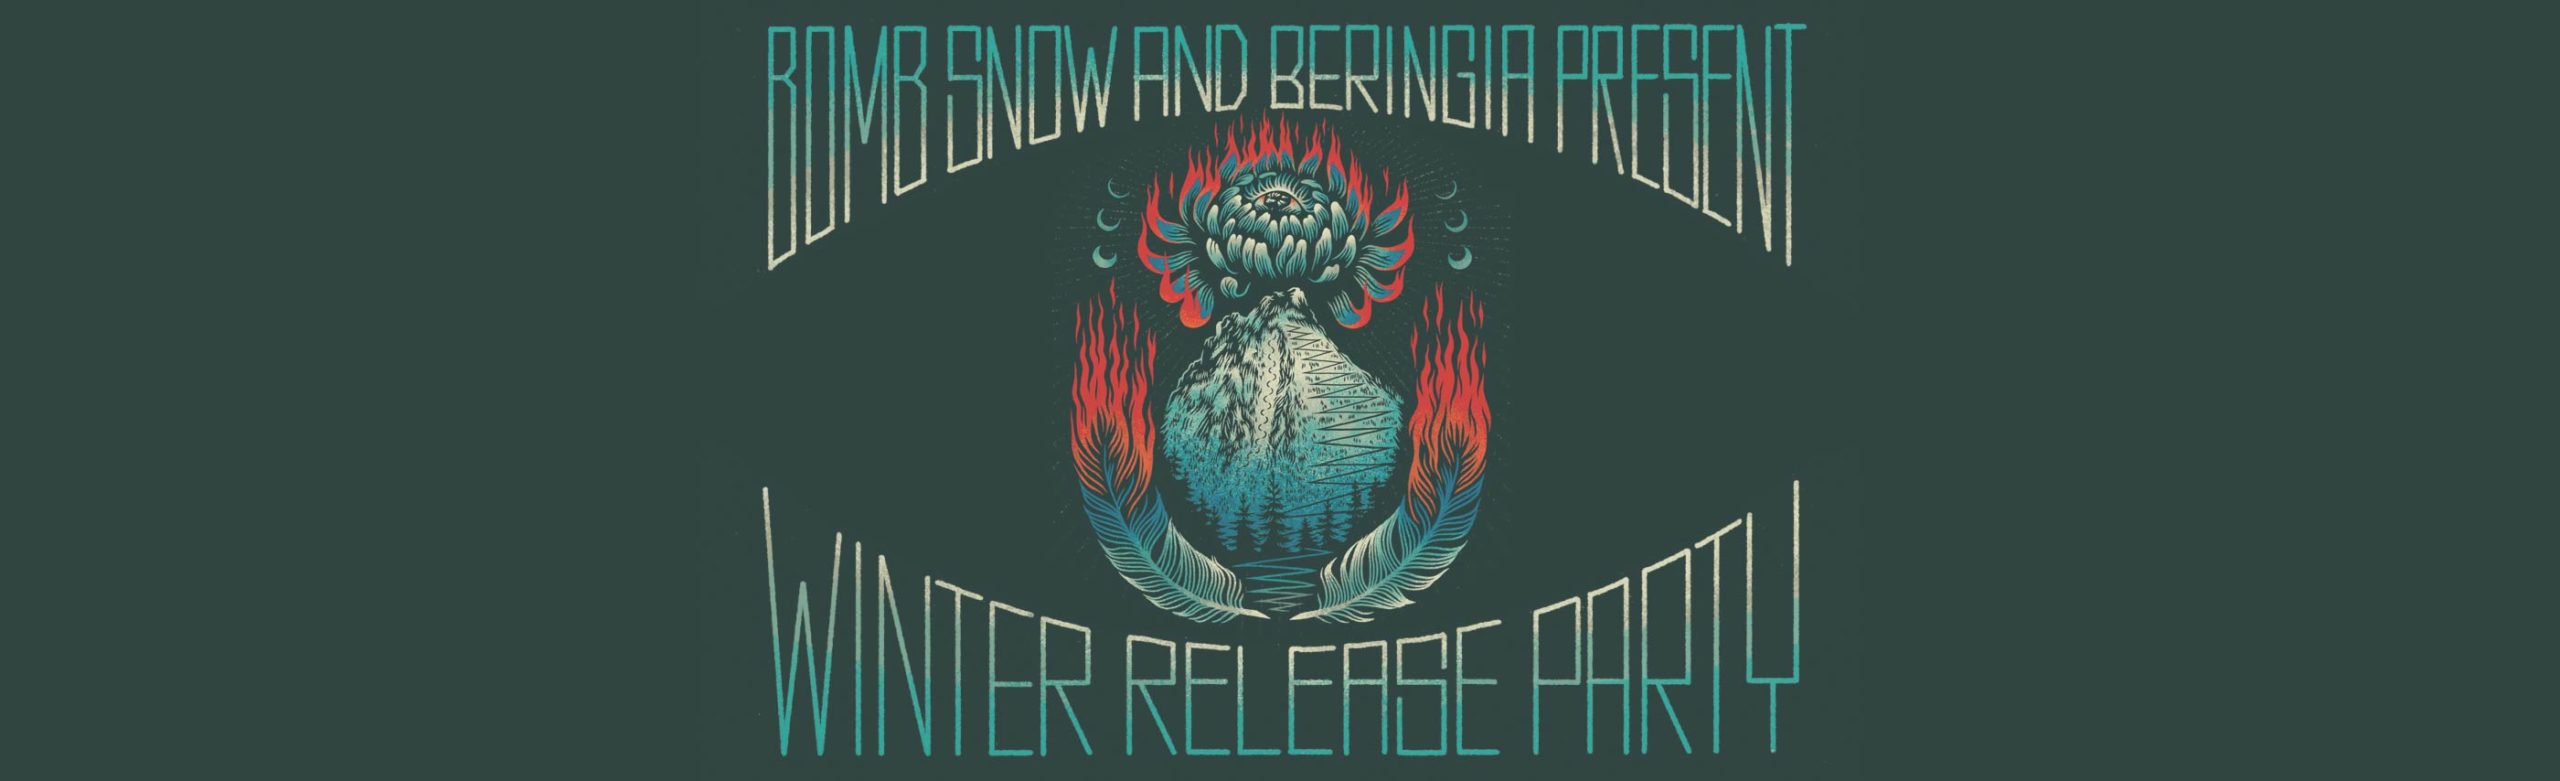 Winter Release Party